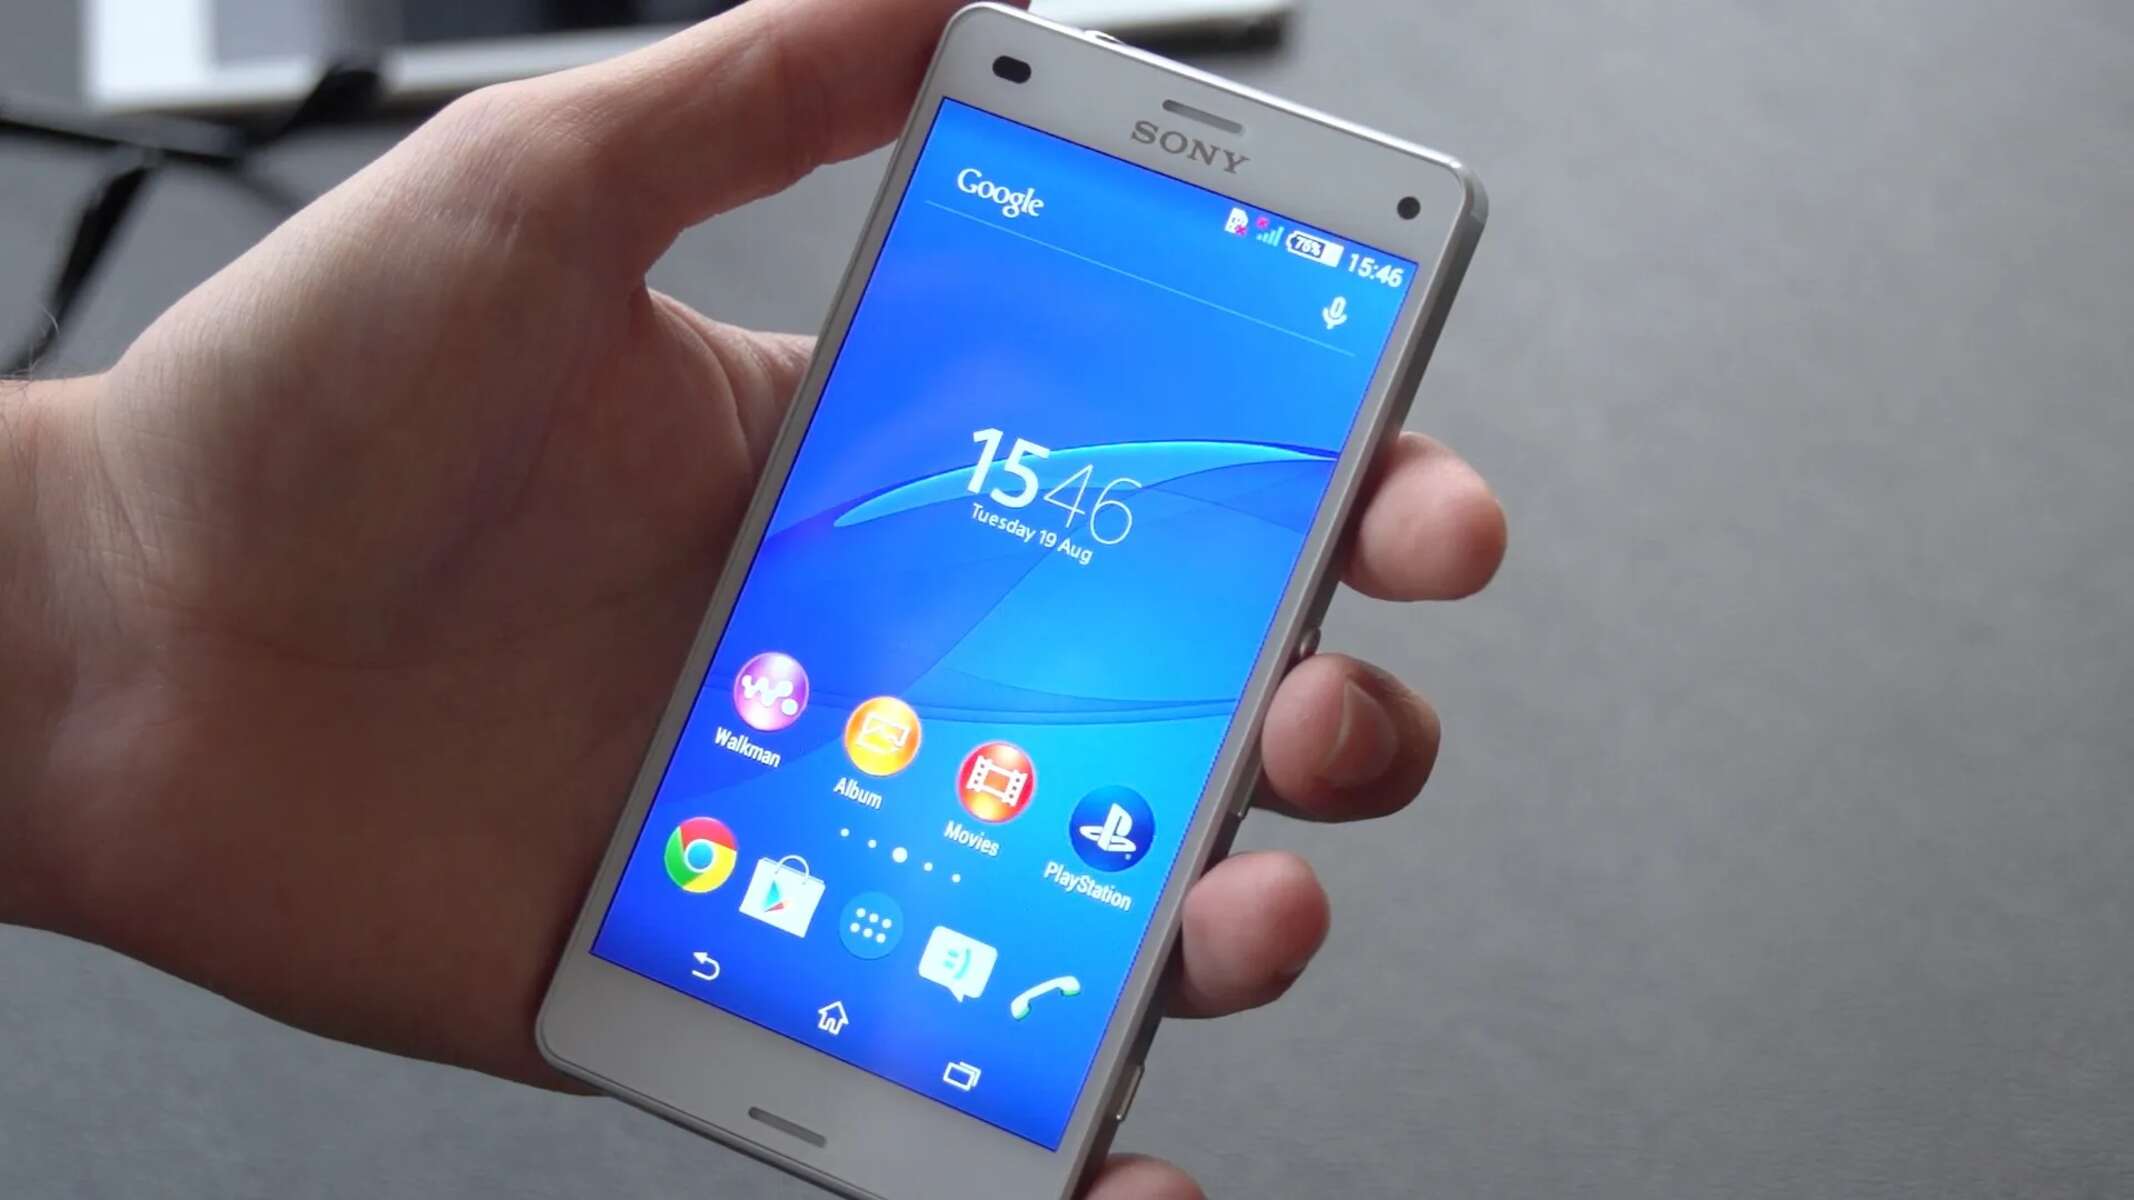 xperia-z3-e6533-rooting-guide-step-by-step-instructions